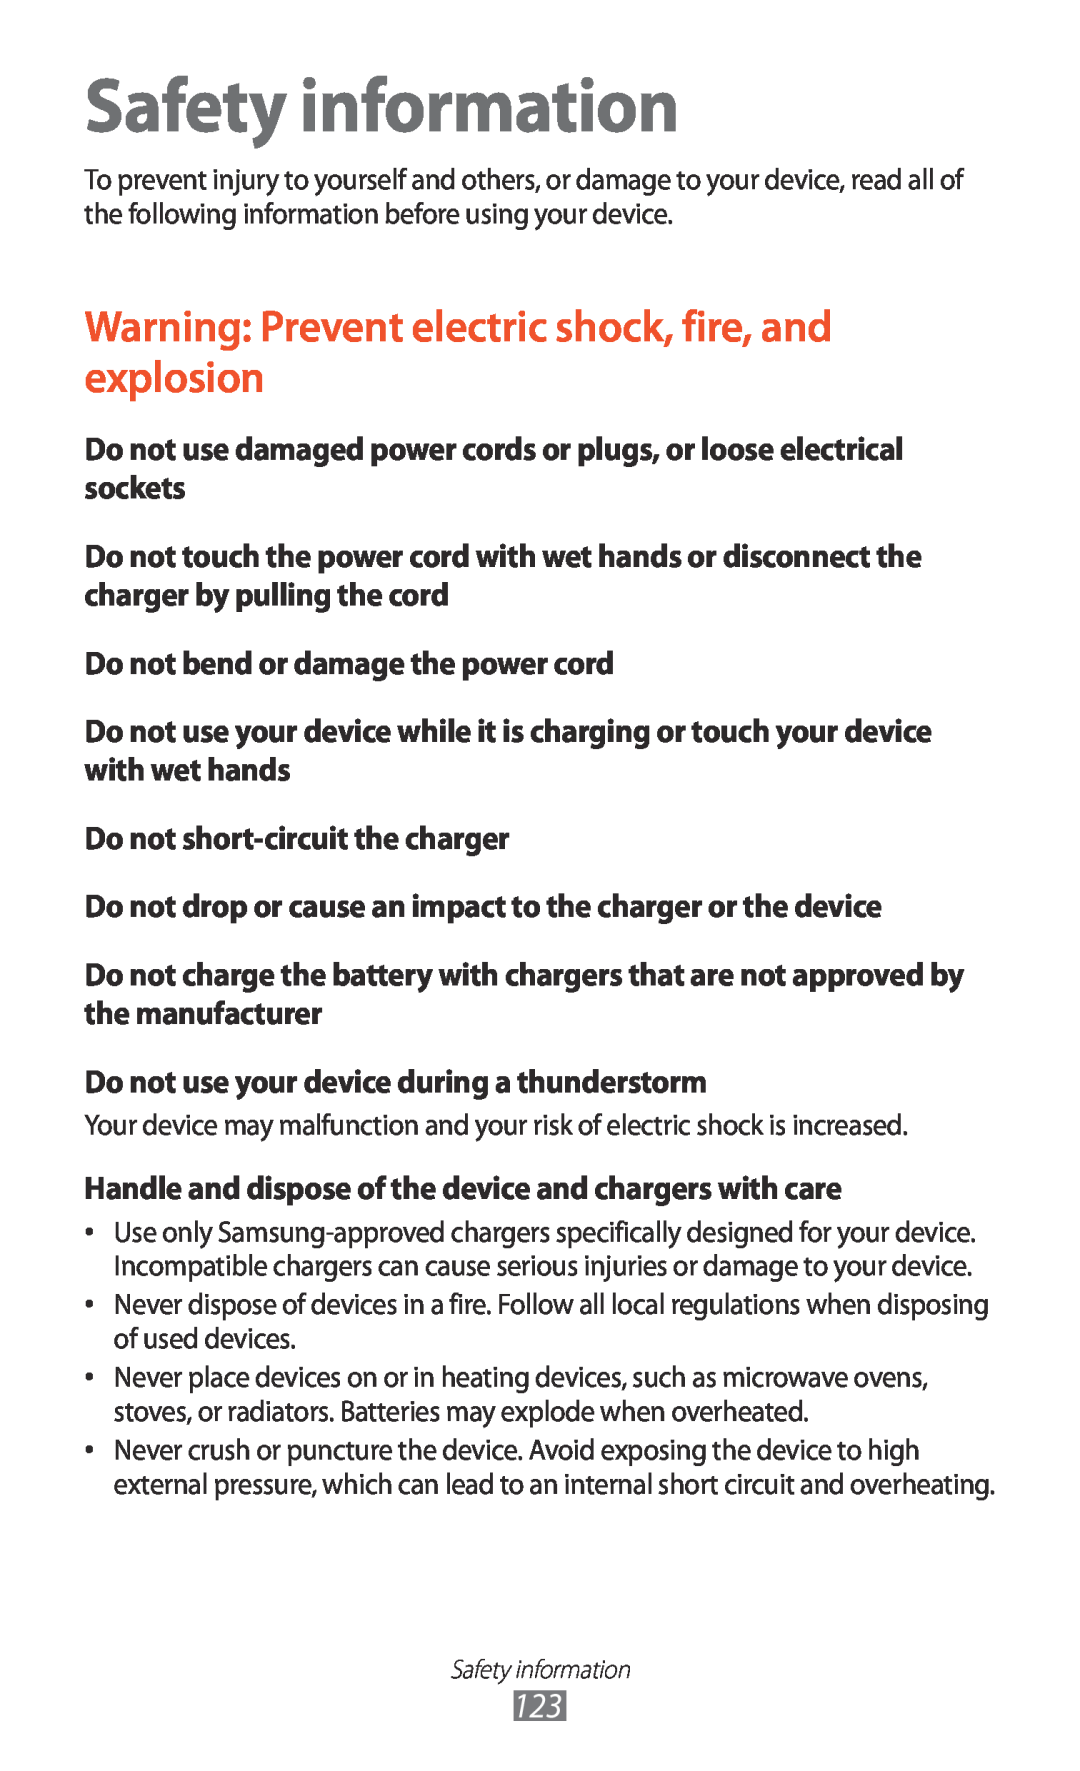 Samsung GT-P7500UWDVDC, GT-P7500UWEDBT manual Safety information, Warning Prevent electric shock, fire, and explosion 